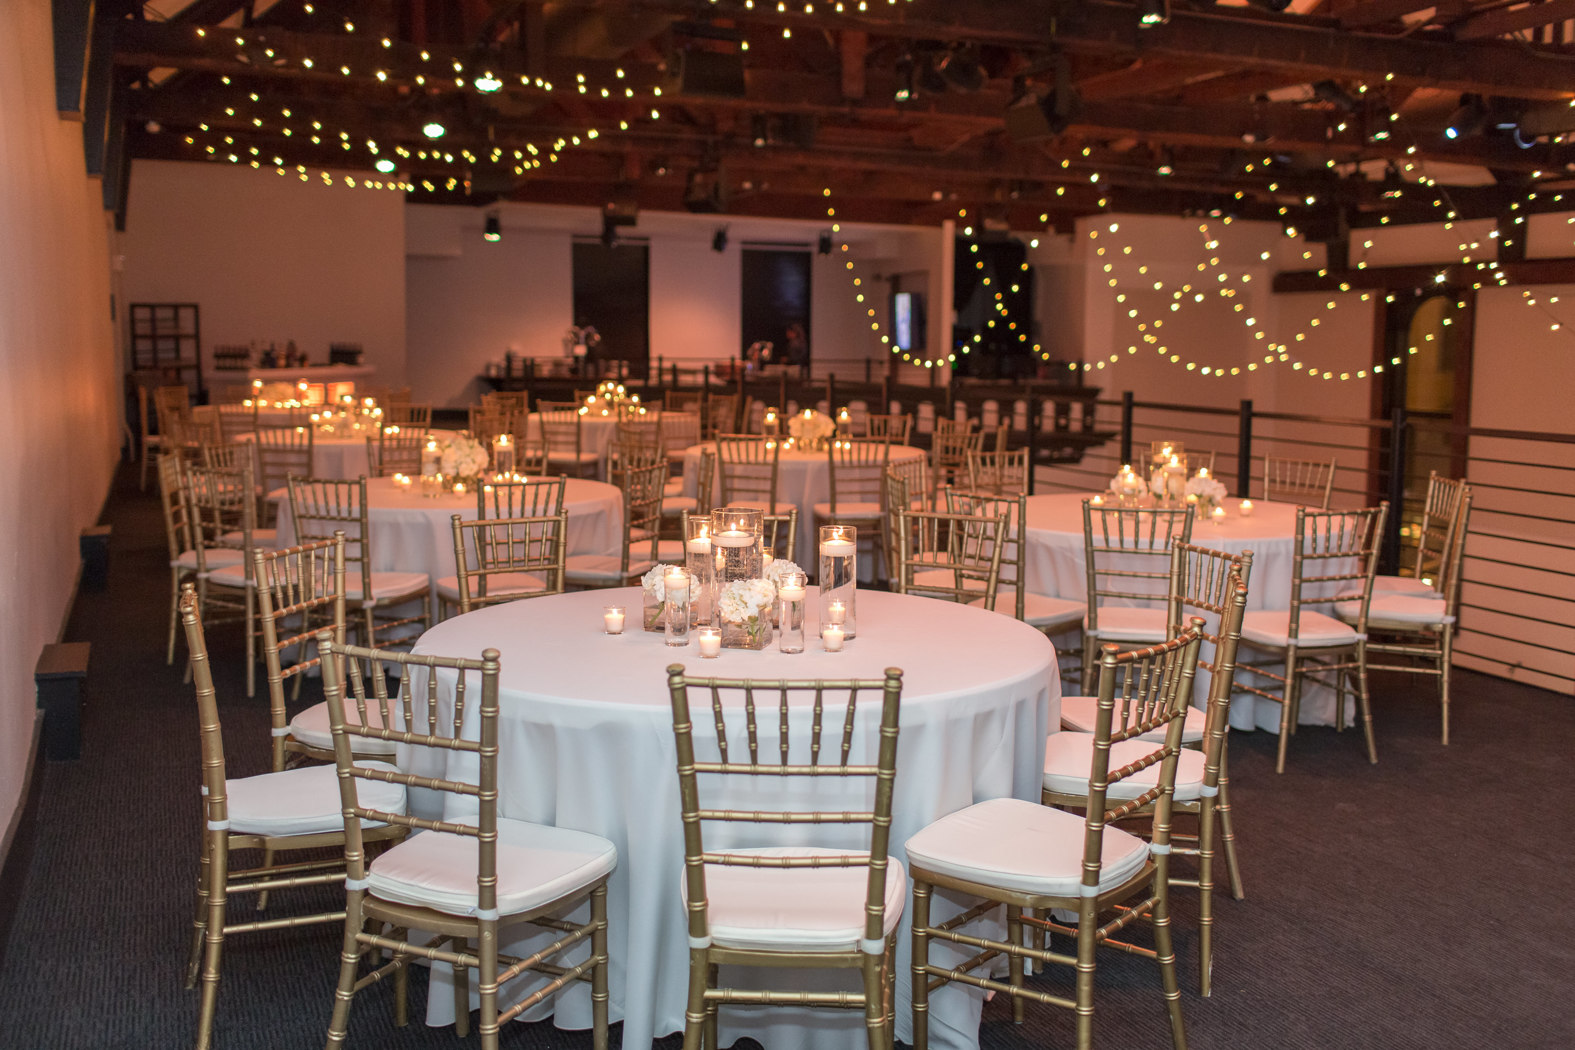 Wedding reception table setup on mezzanine with gold chiavari chairs and classic white table linens